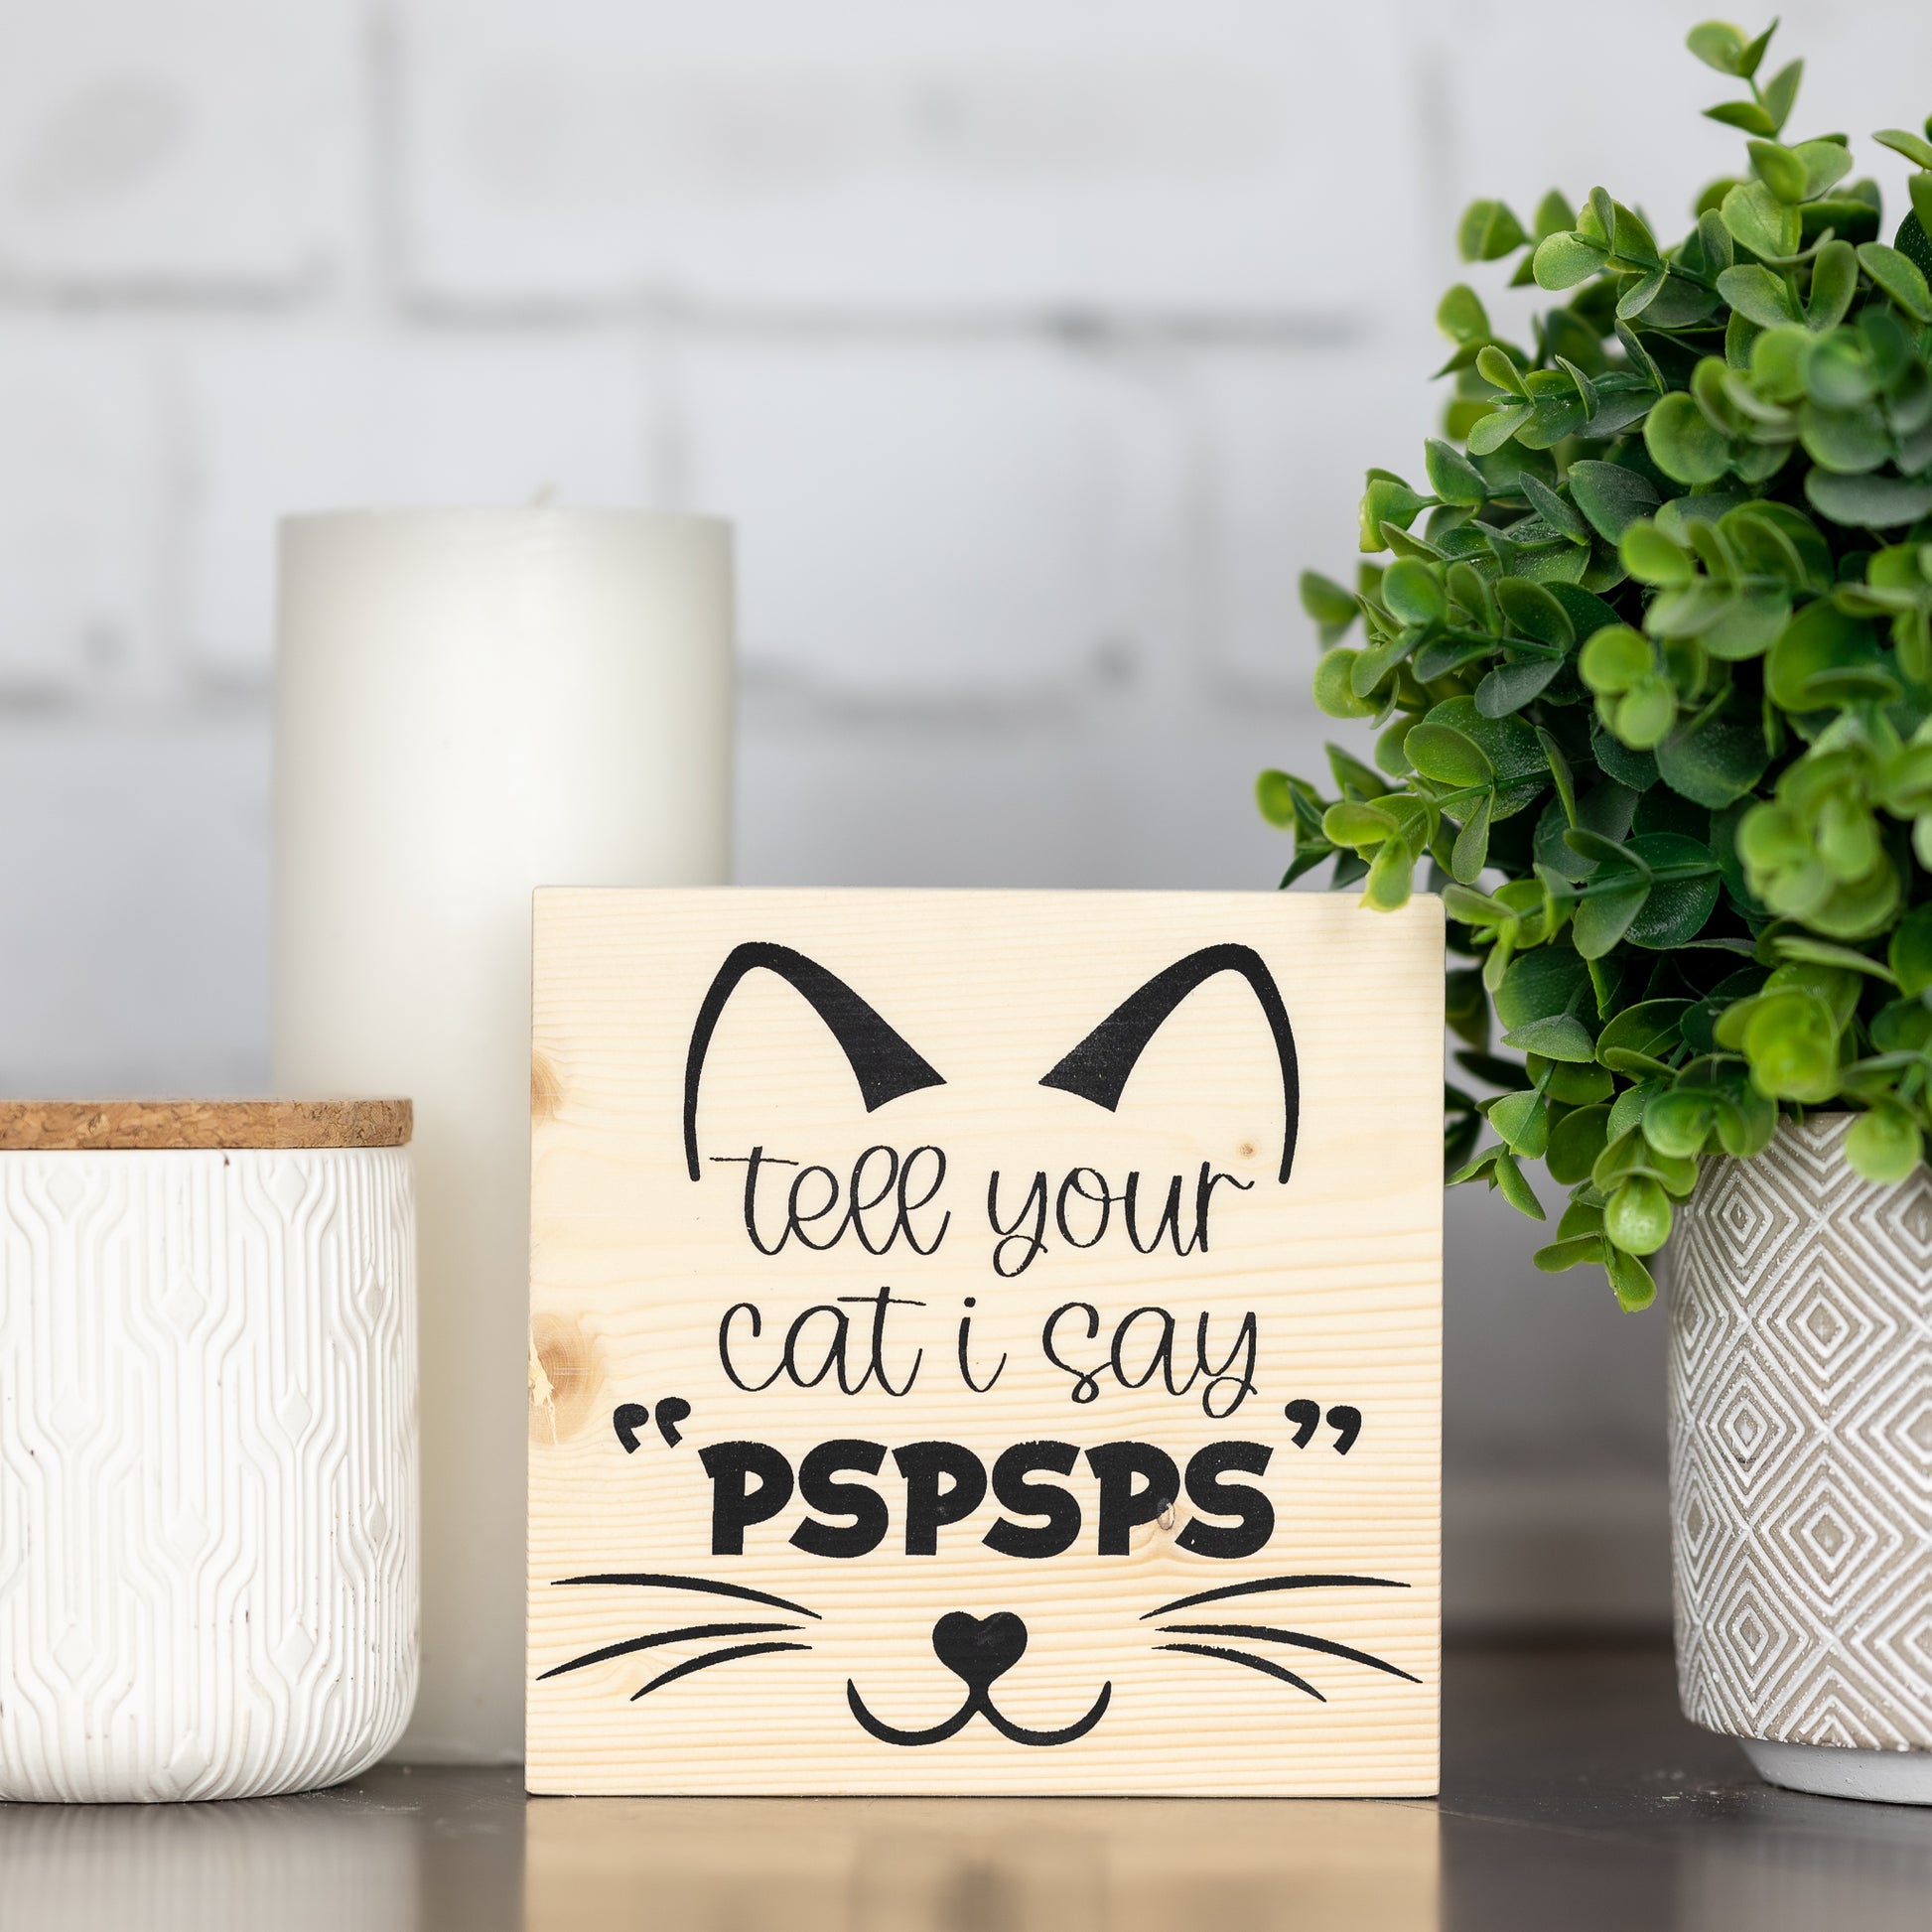 tell your cat I say "pspsps" ~ wood block sign